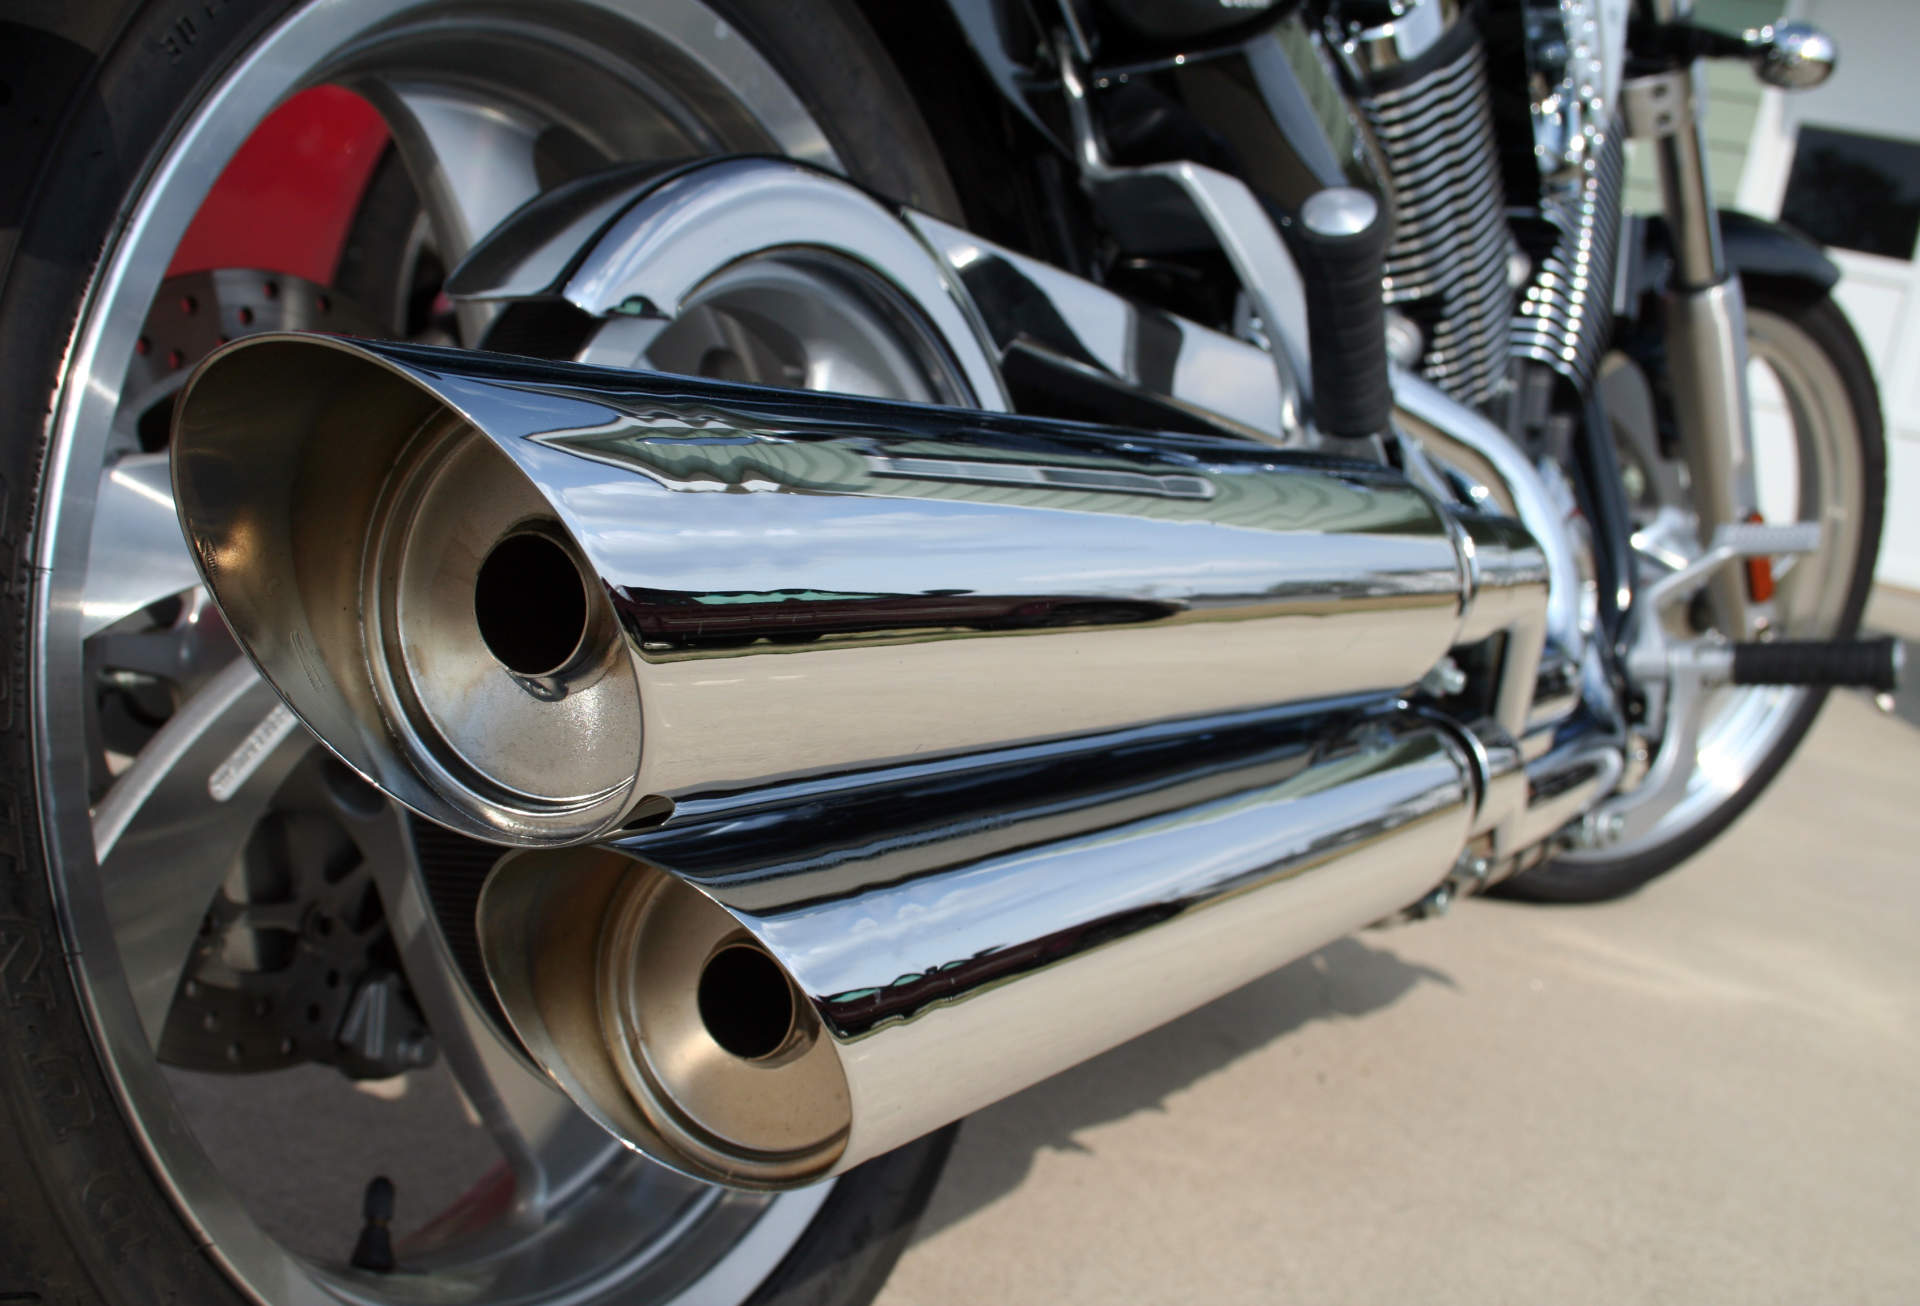 Loud motorcycle exhaust pipes are a signature of the biker rally in Hollister, California